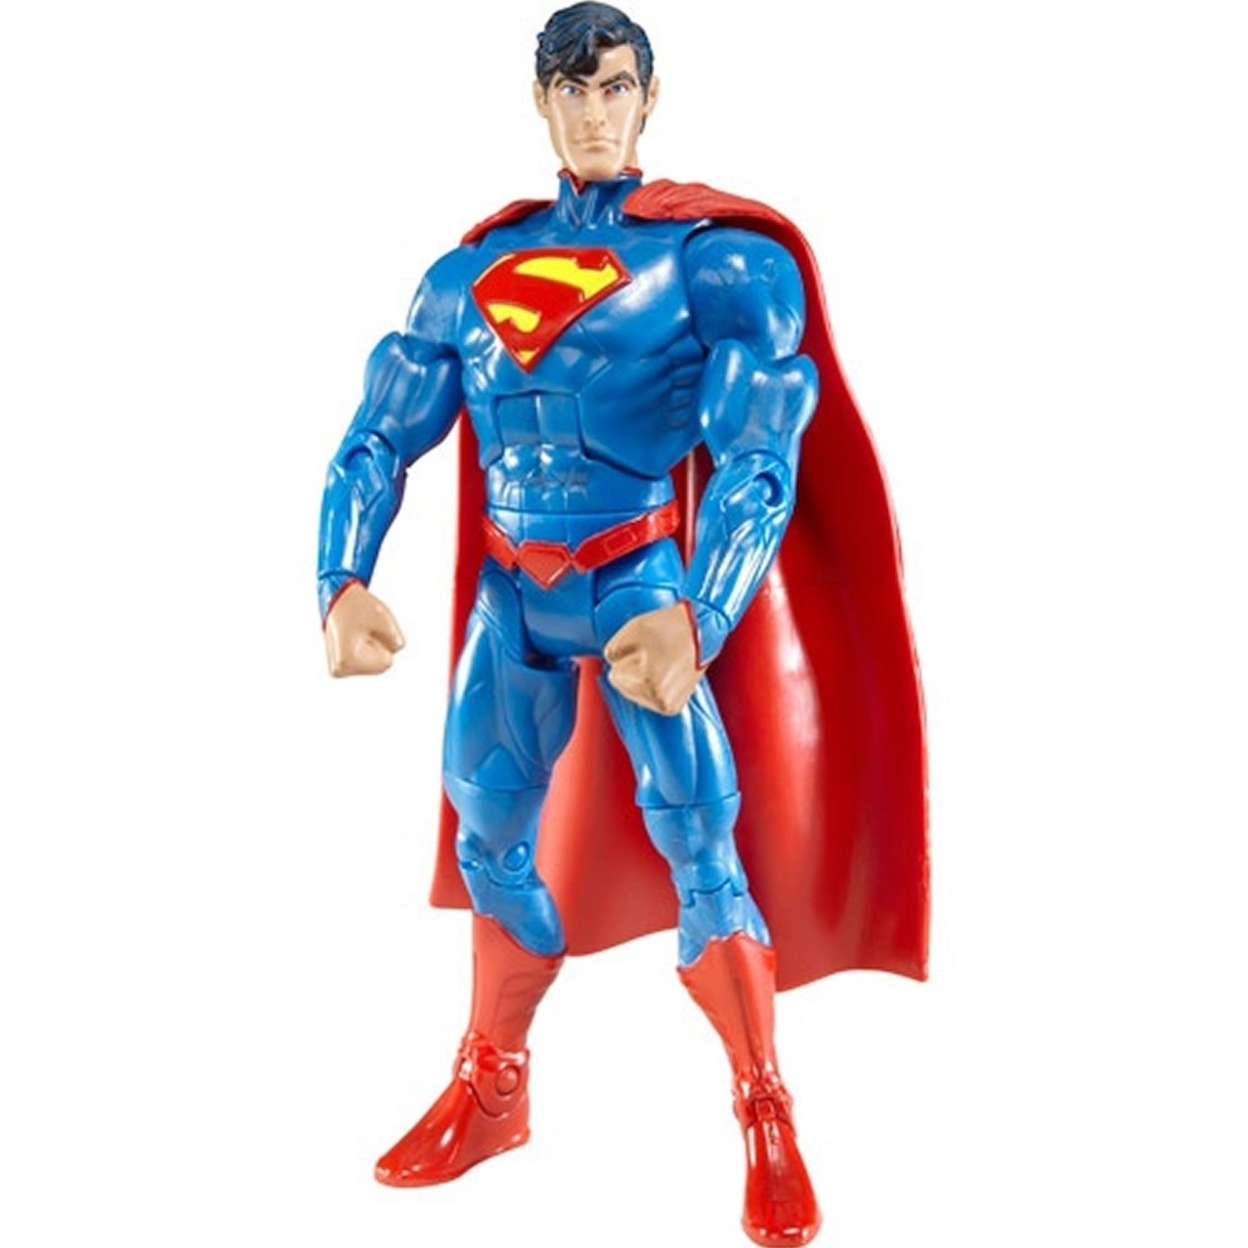 DC Comics Unlimited Superman Action Figure Collector Toy Justice Hero Mattel - image 2 of 4